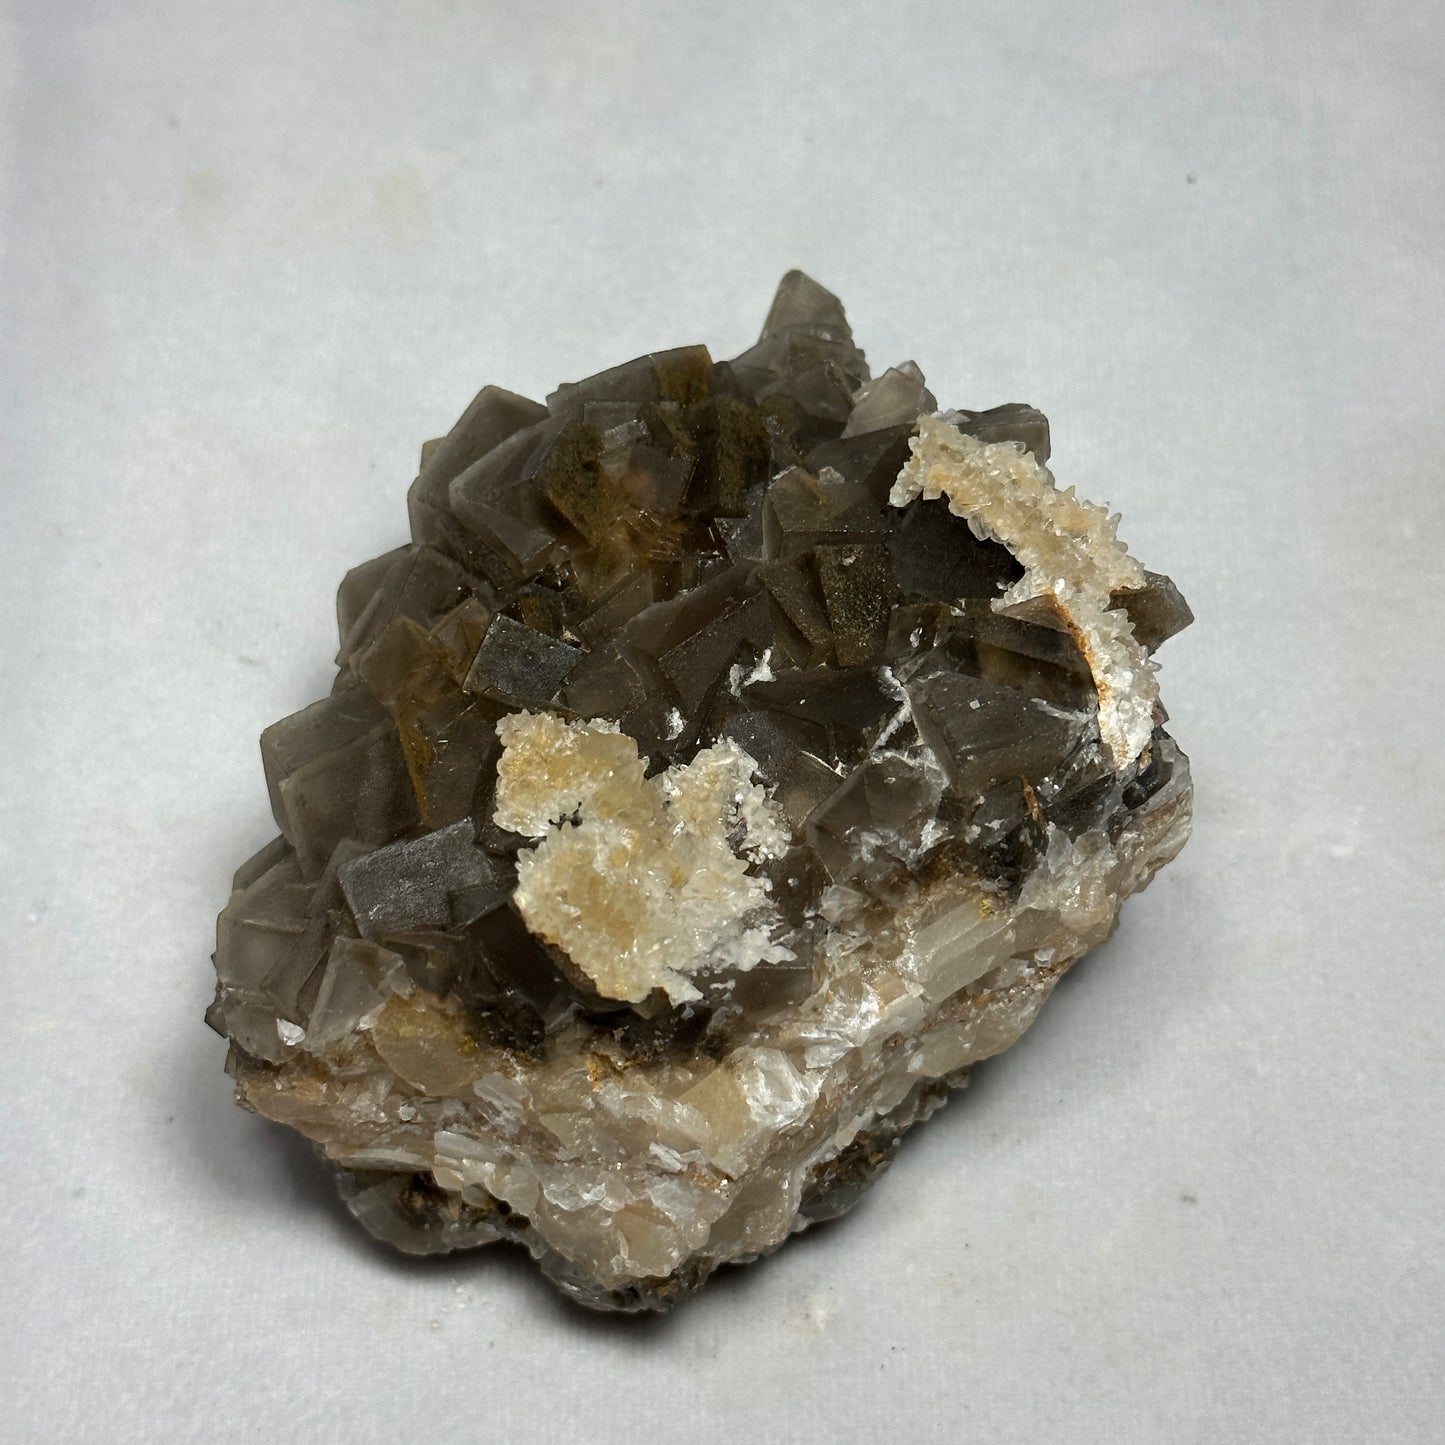 Lovely Fluorite and Dogtooth Calcite Cluster